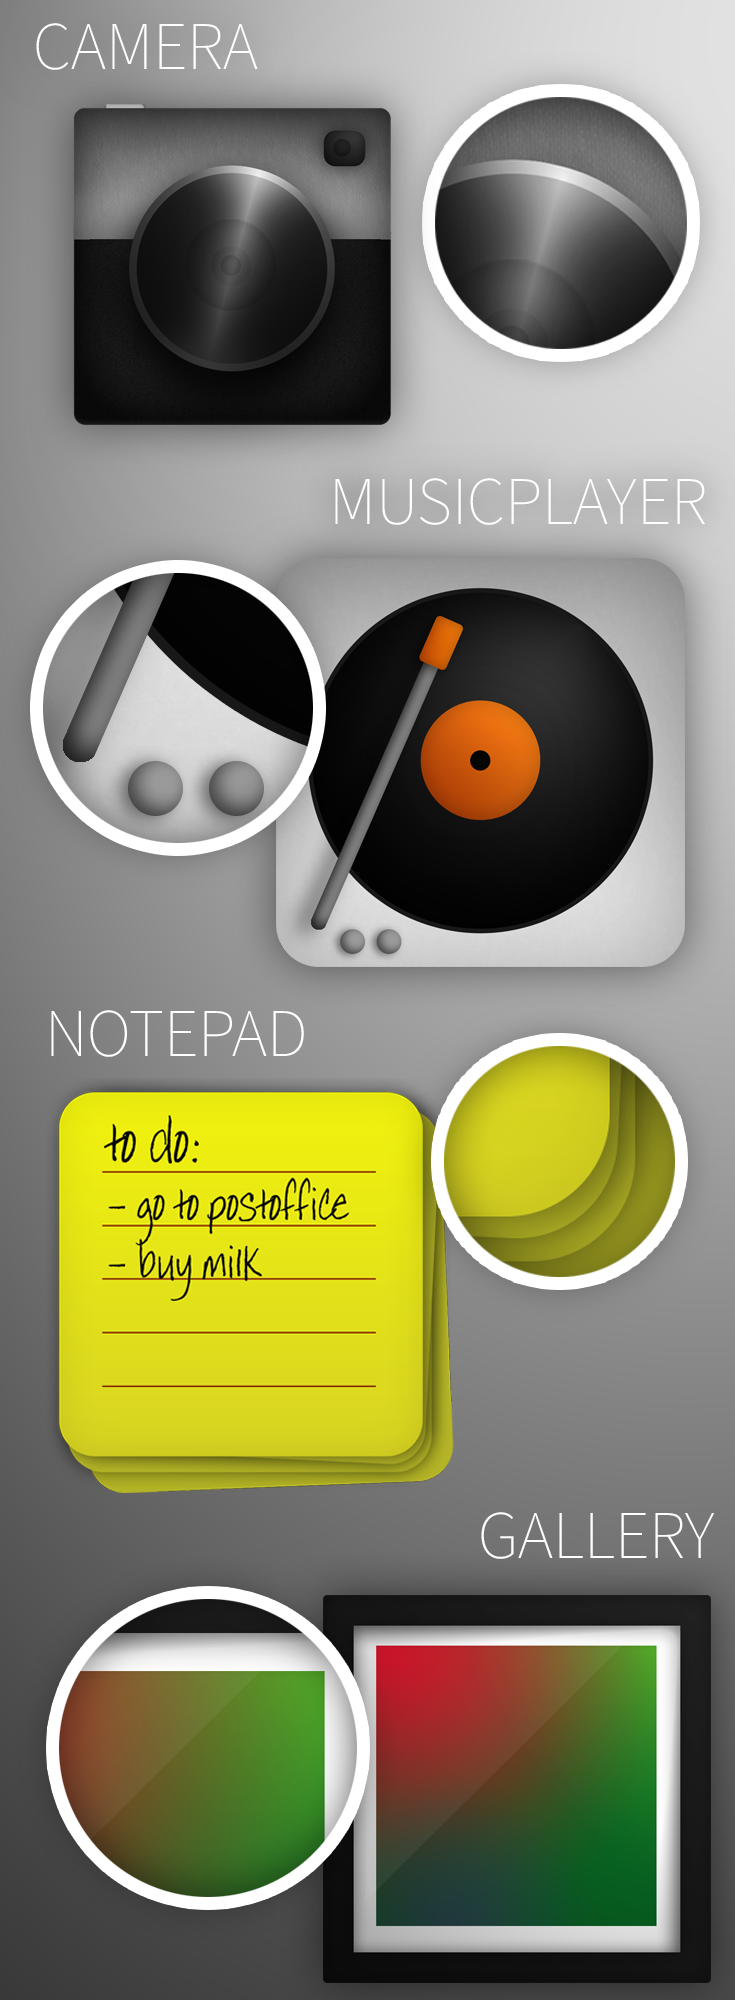 Karsten Montag Icon icons Real camera musicplayer player note Memo notepad gallery Album realistic